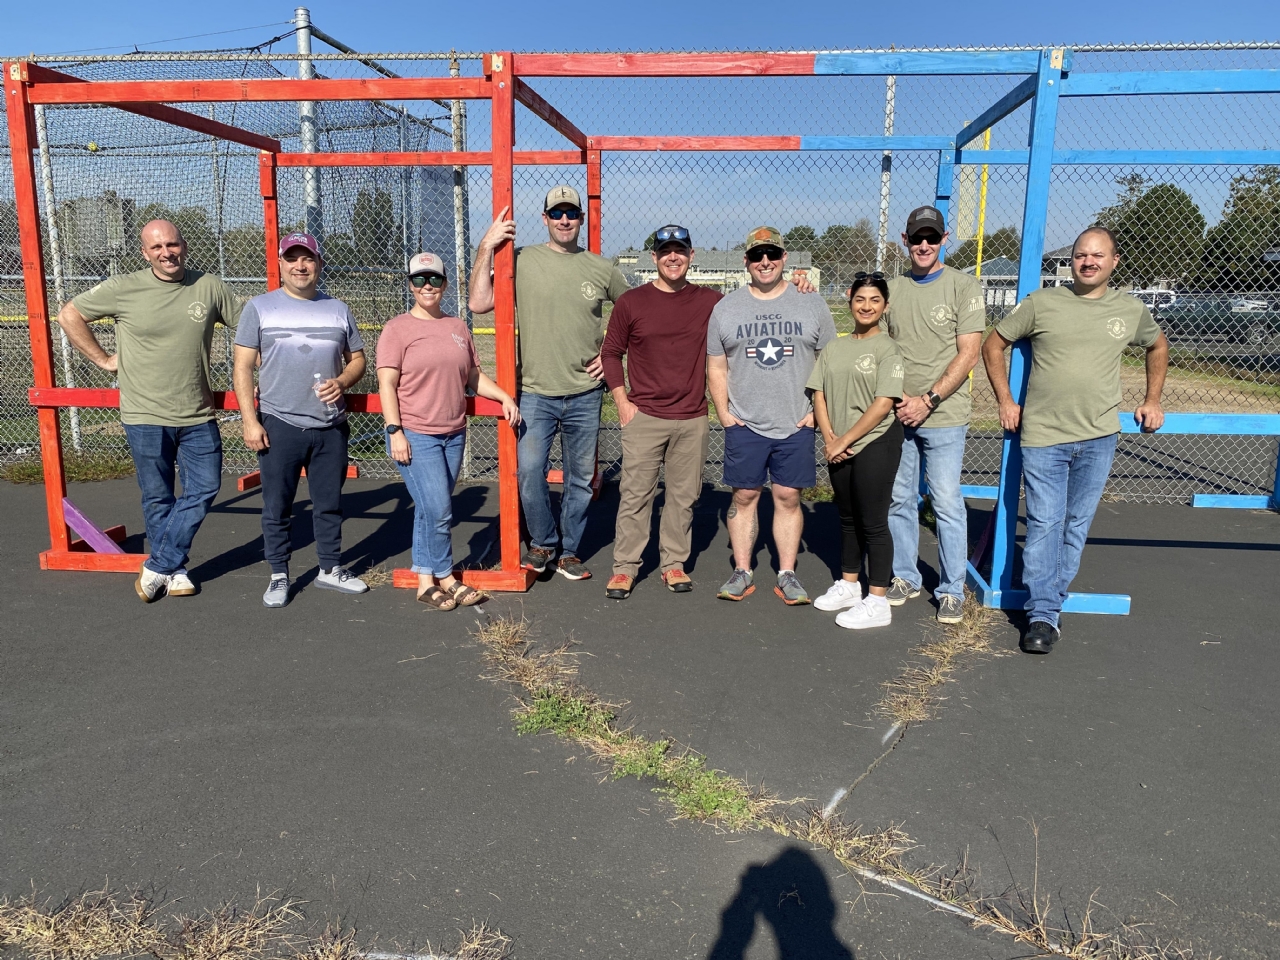 Local USCG crew put game booths up for community